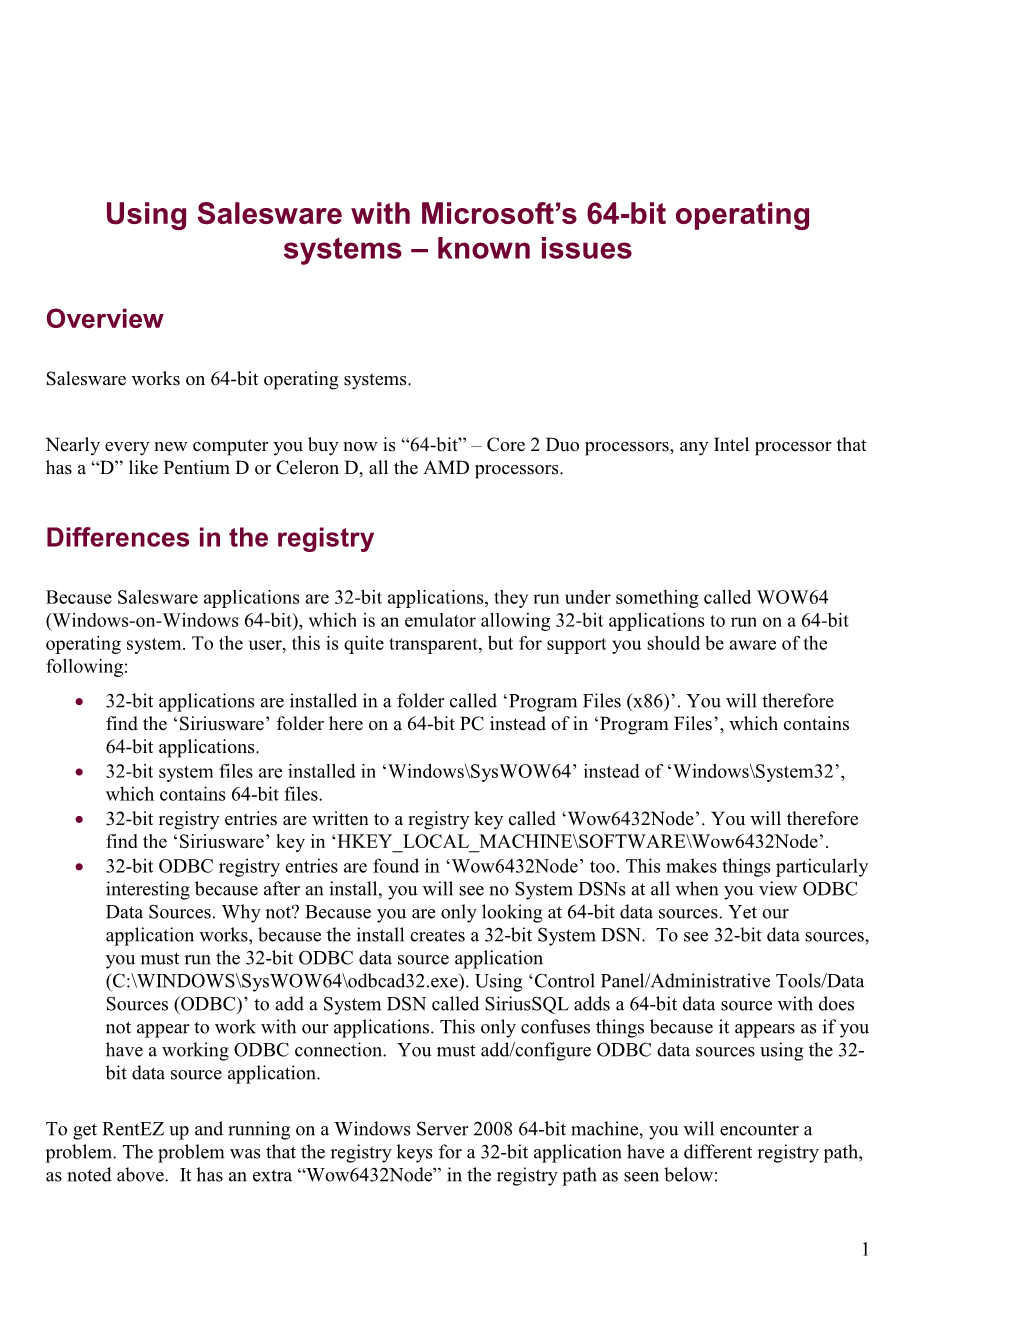 Using Salesware with Microsoft's 64-Bit Operating Systems – Known